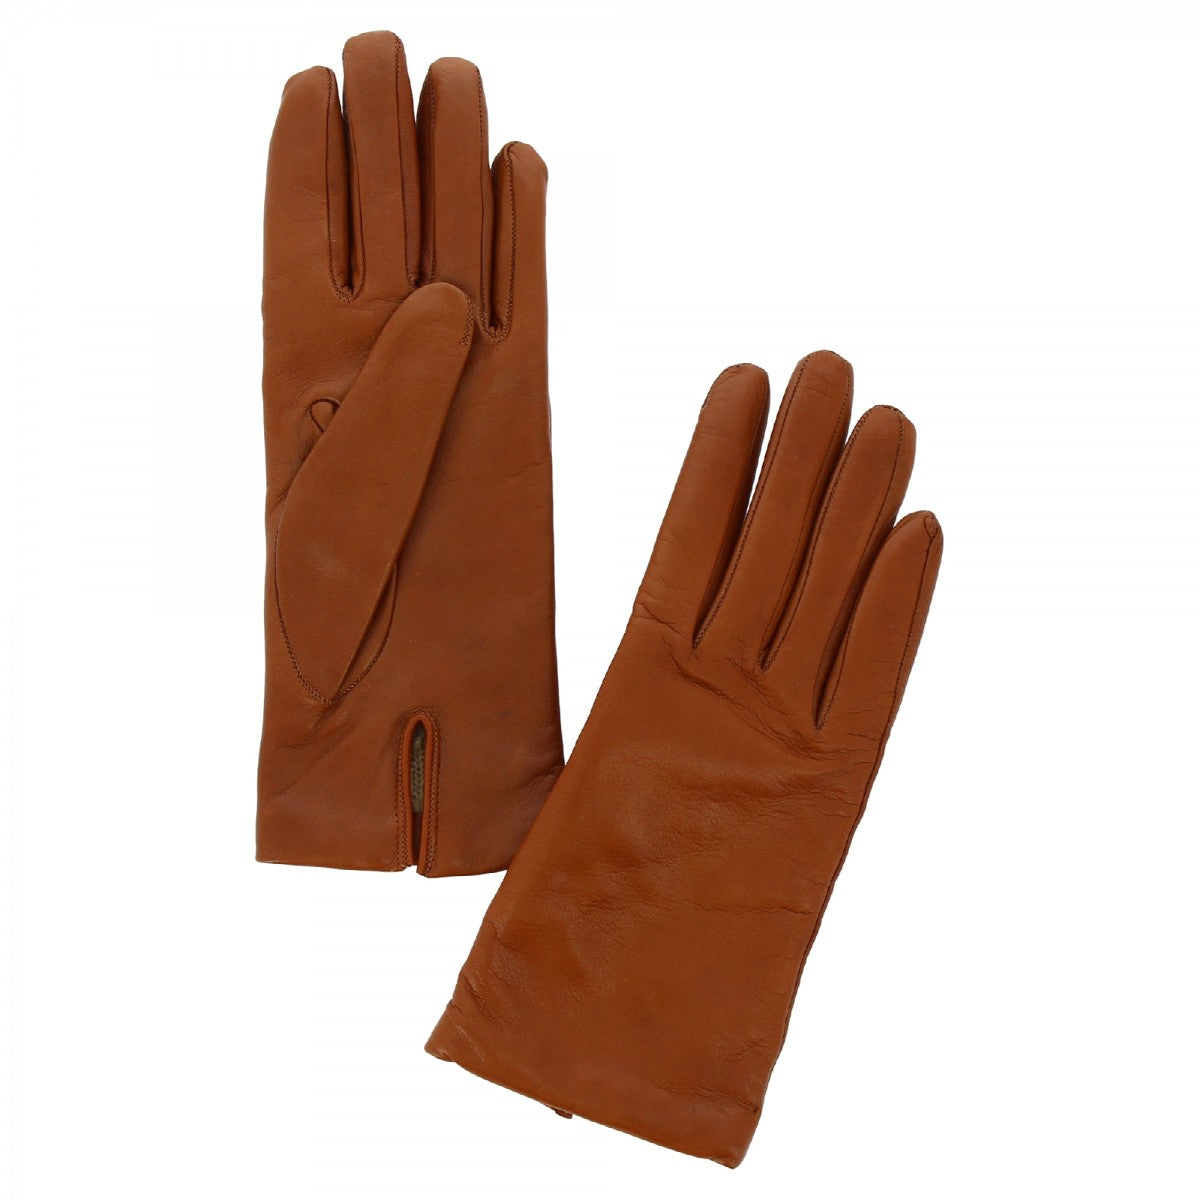 Classic women's handmade gloves in brown nappa leather lined in cashme